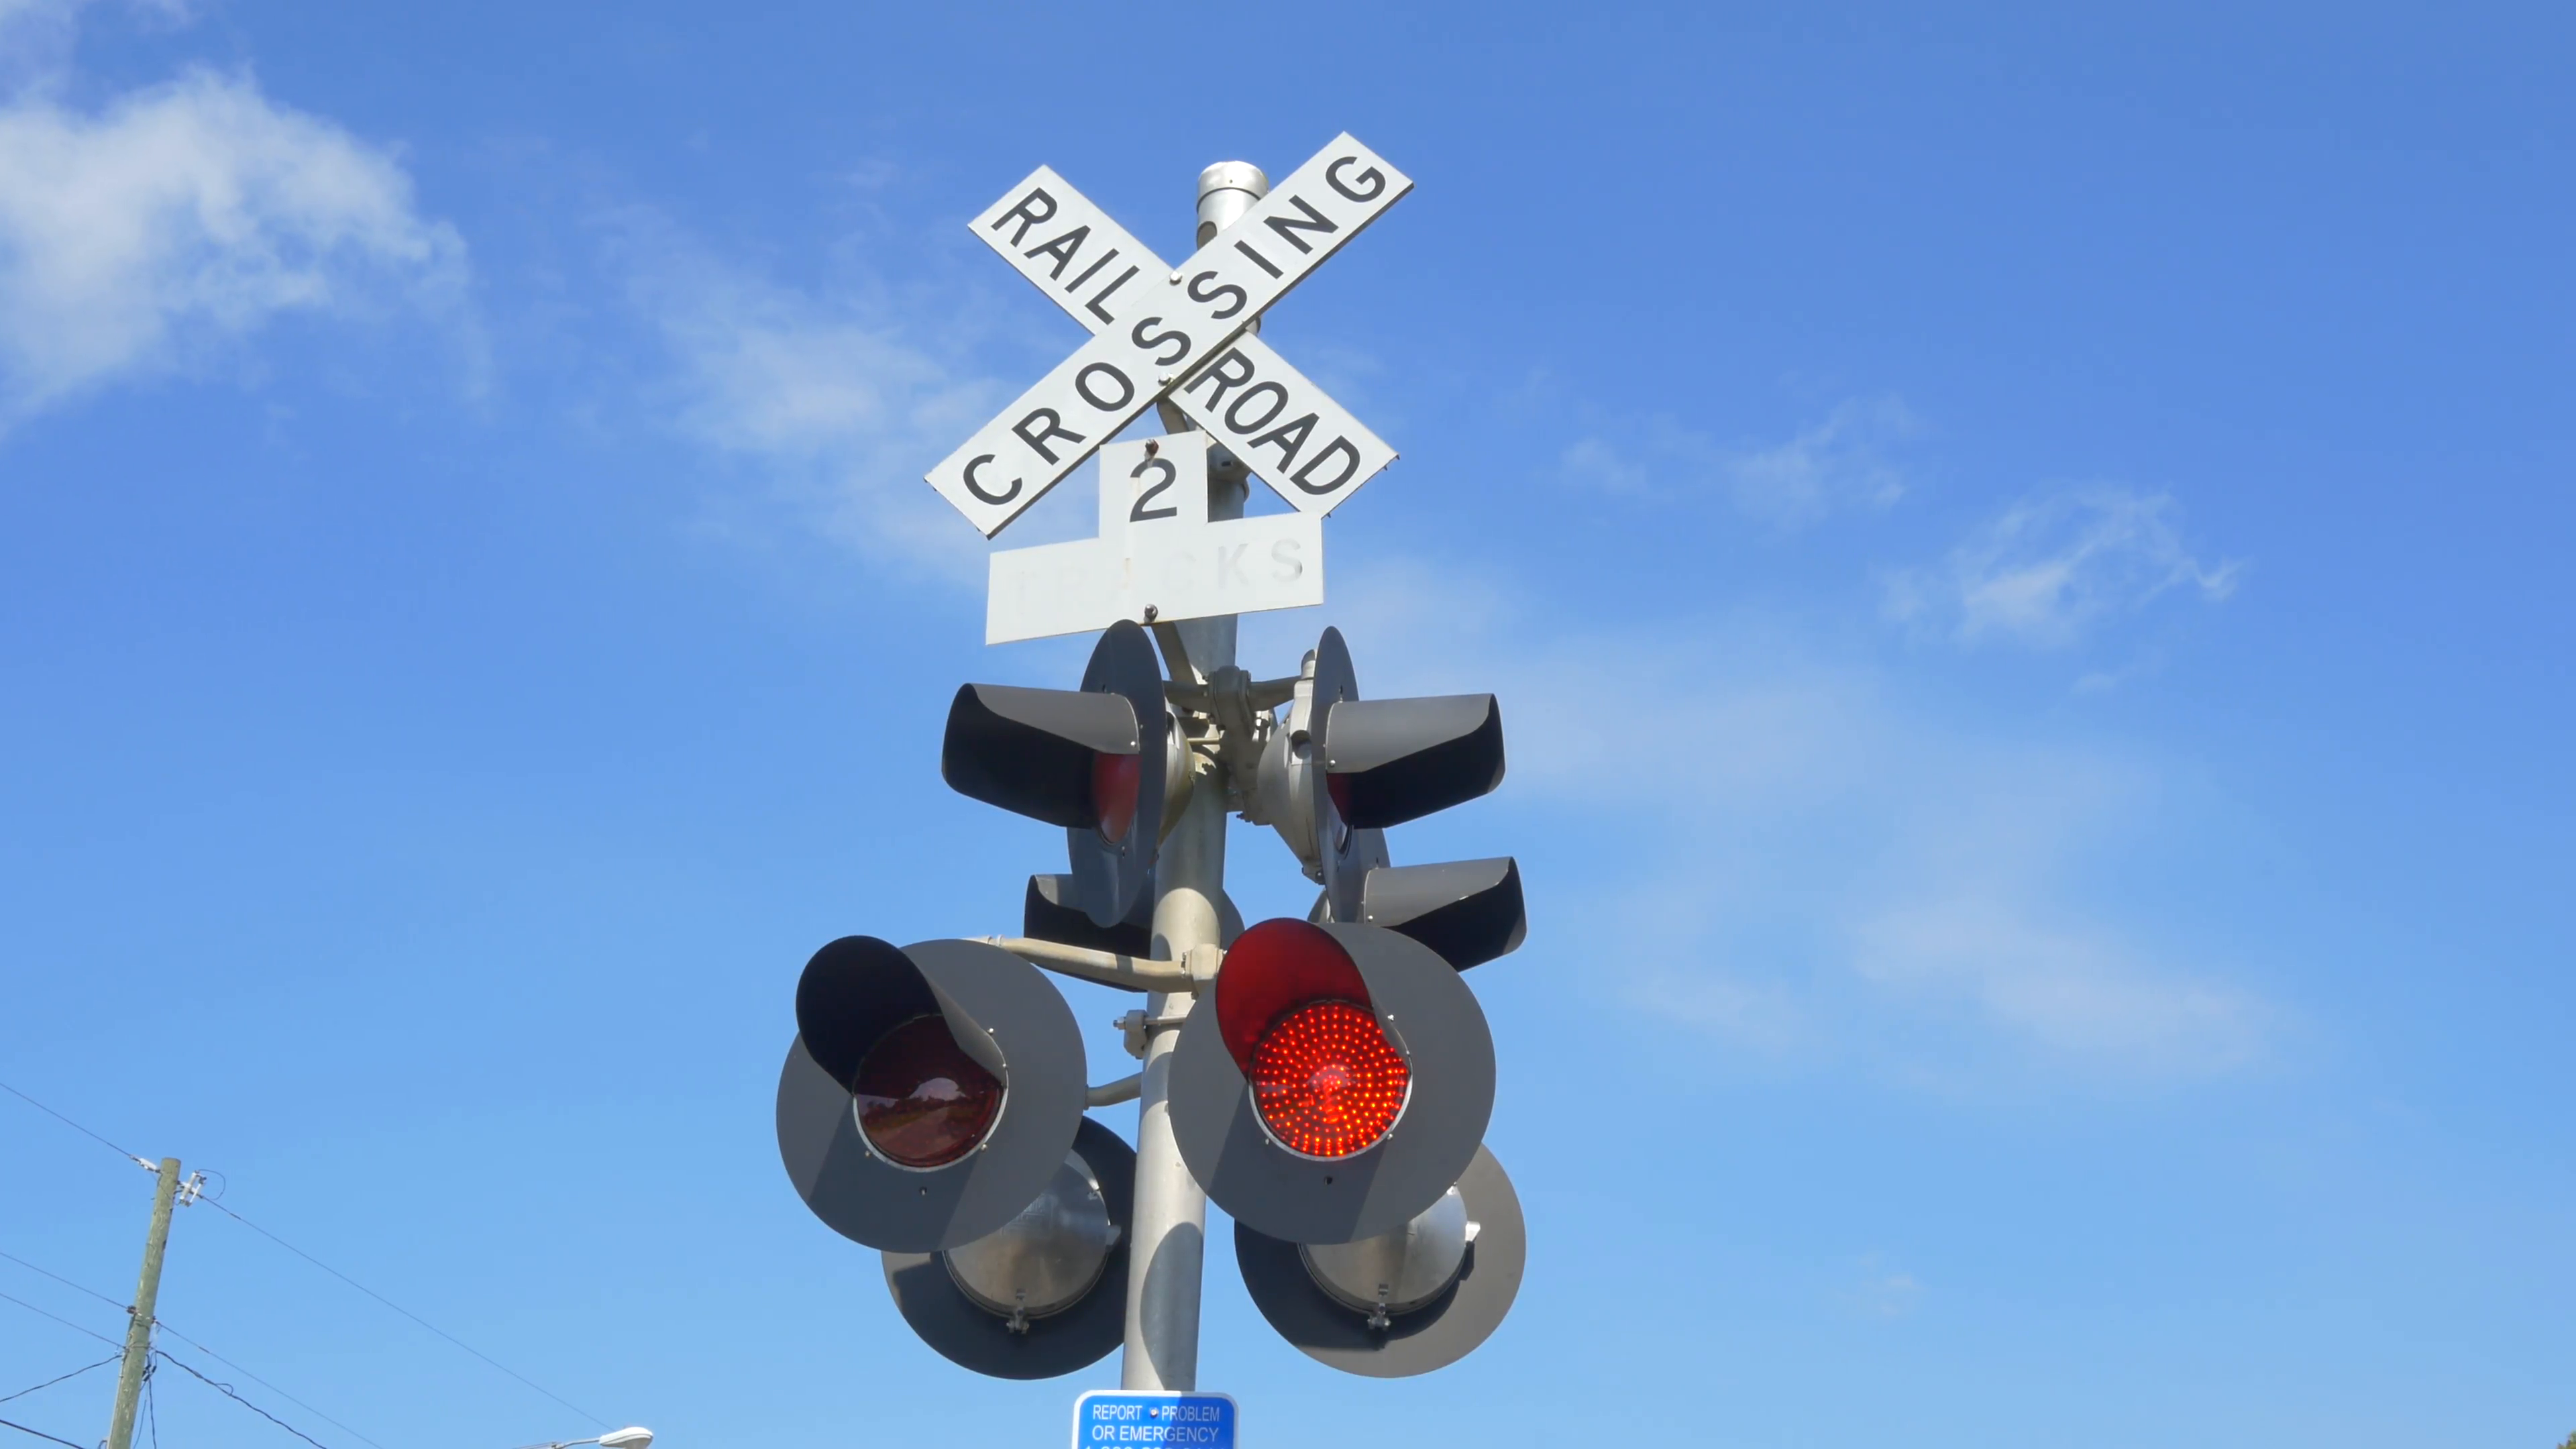 Railroad crossing with flashing red lights warning and announcing ...